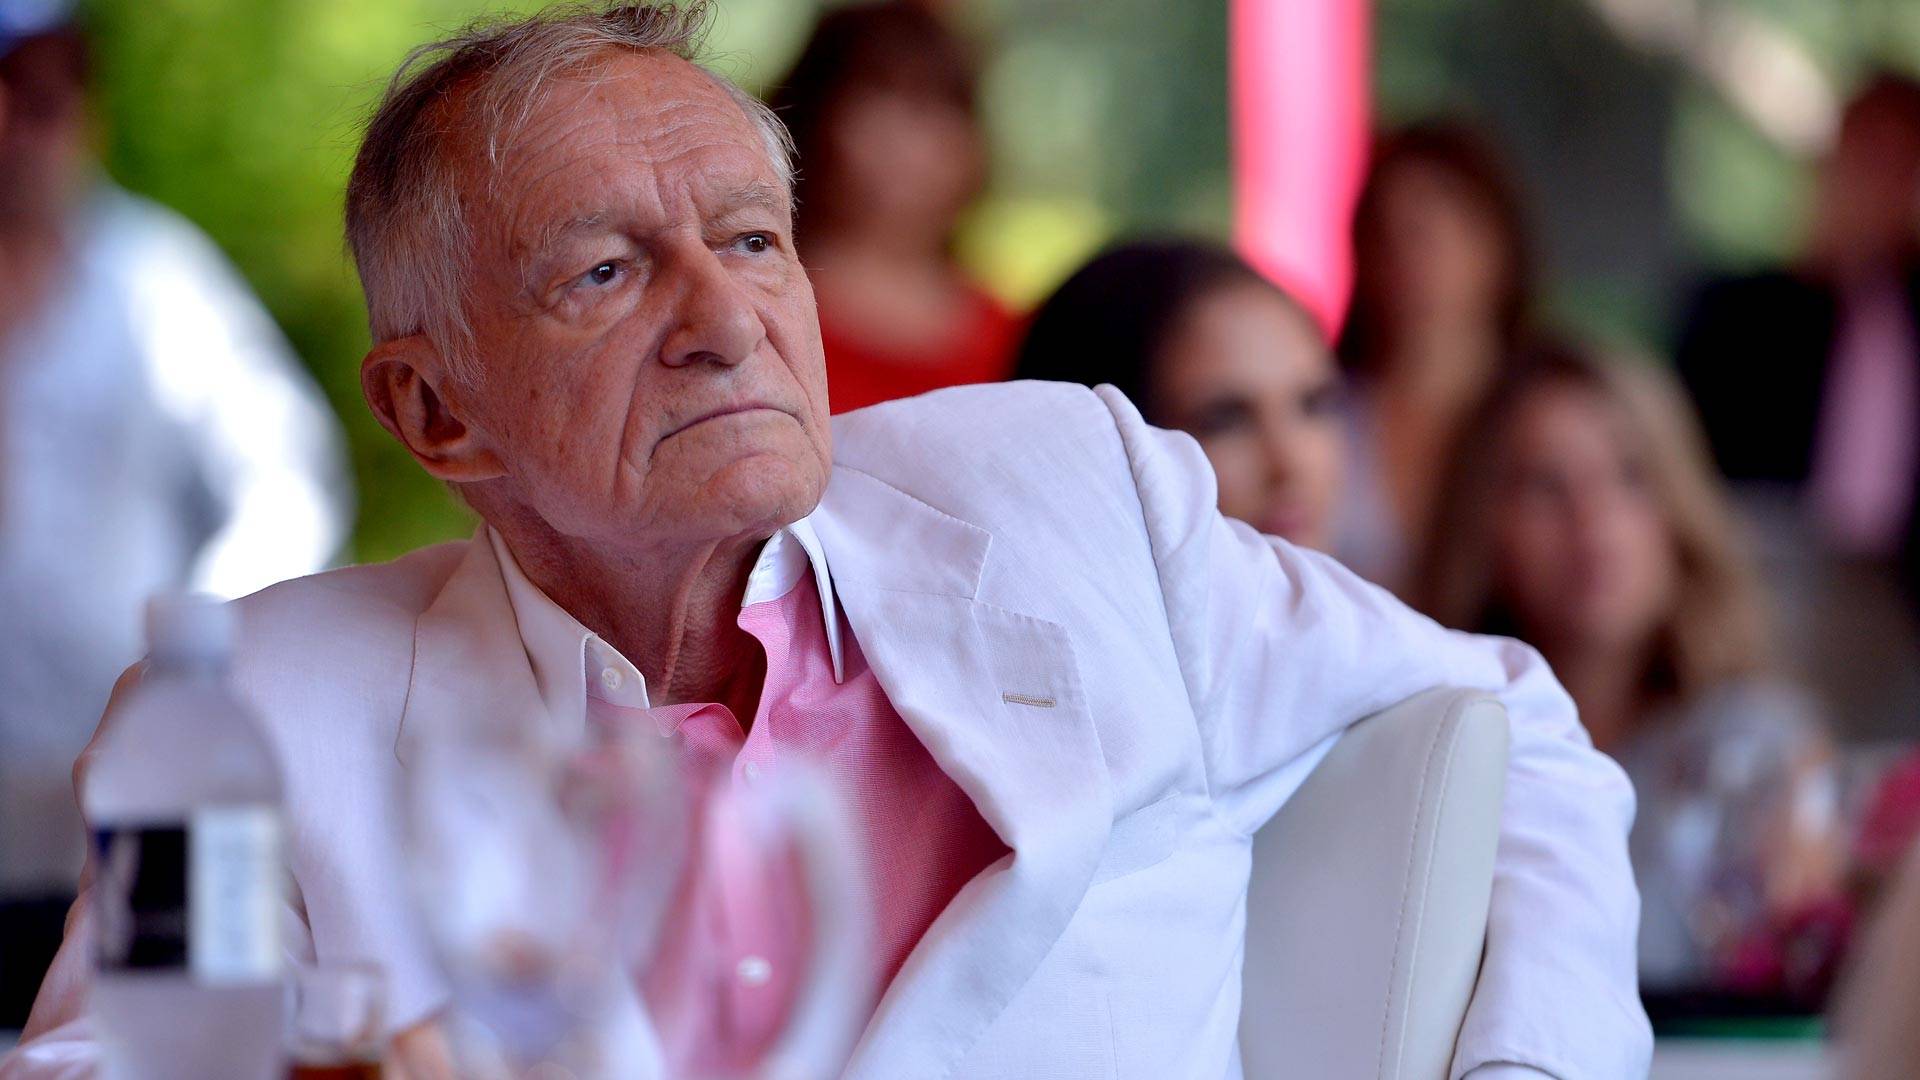 Hugh Hefner attends Playboy's 2013 Playmate Of The Year luncheon honoring Raquel Pomplun at The Playboy Mansion on May 9, 2013. Charley Gallay/Getty Images